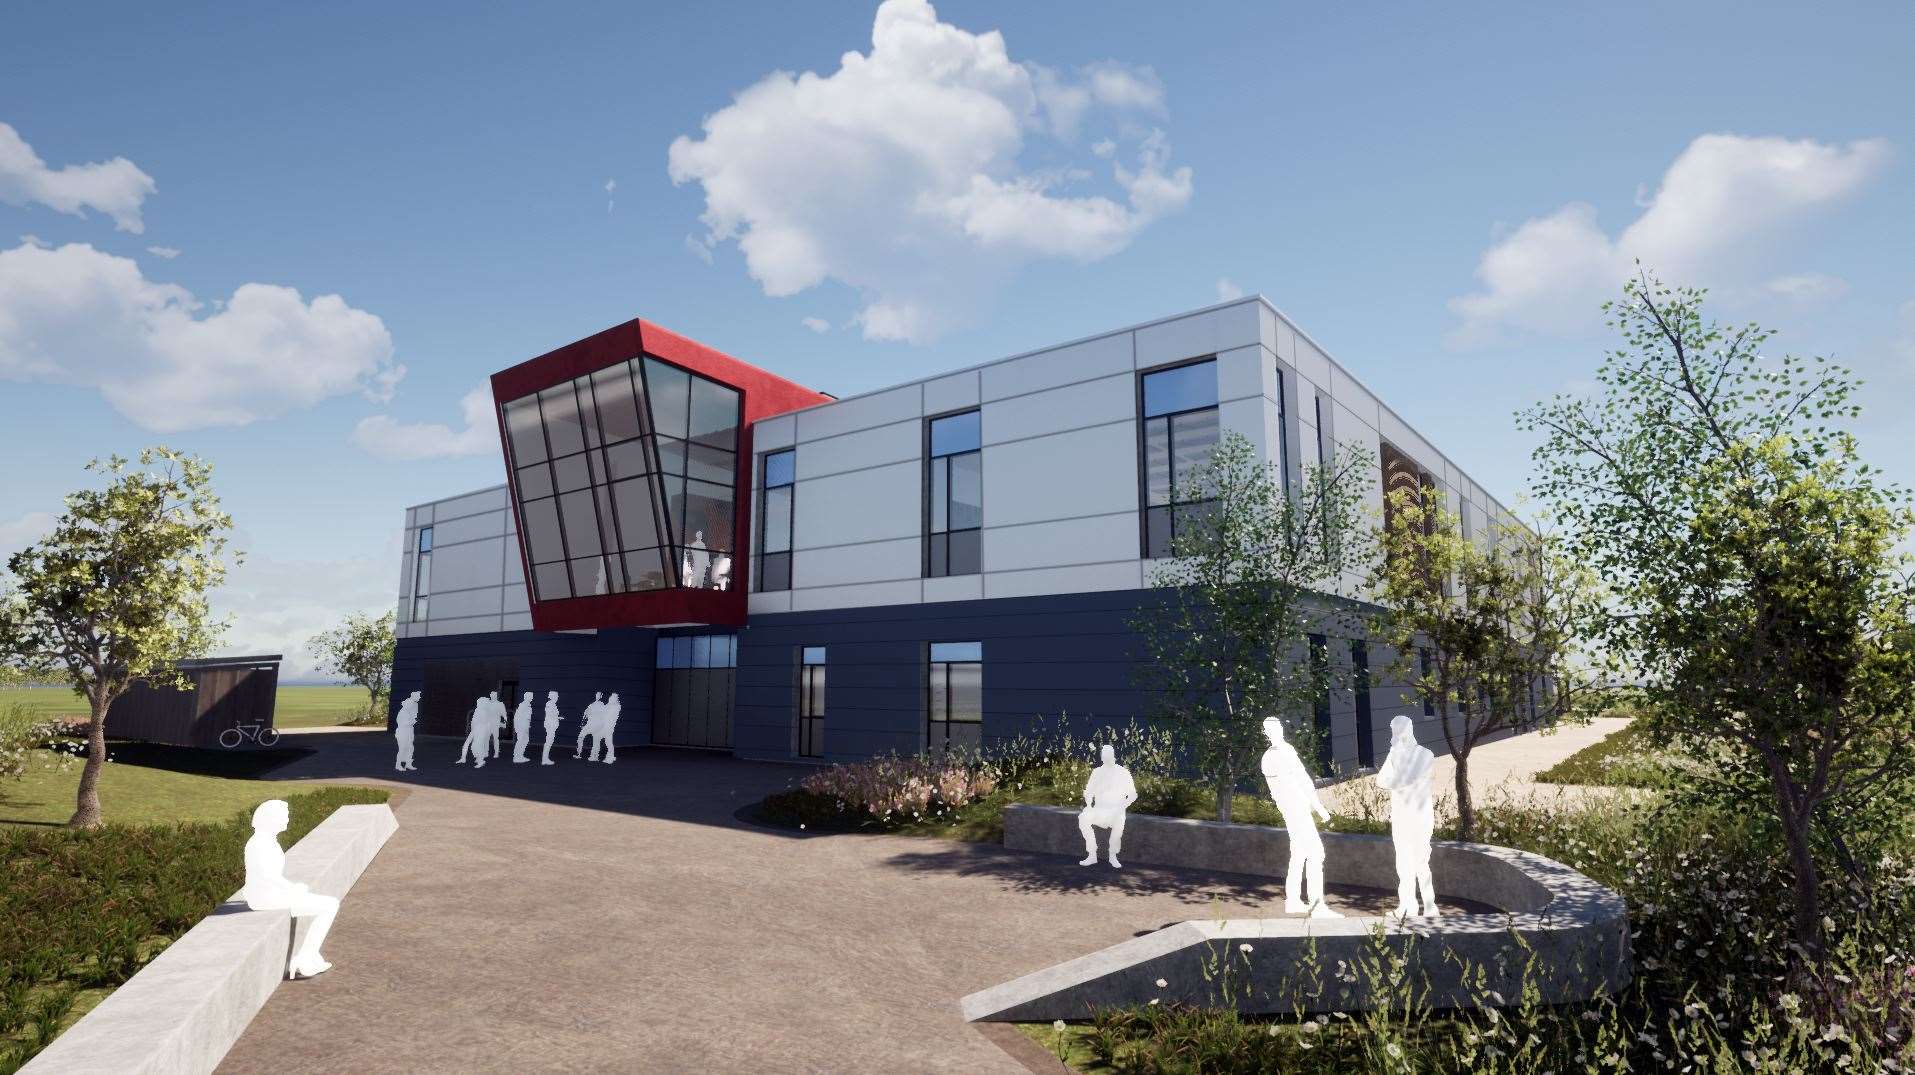 Robertson Construction Northern has been awarded a £9 million contract to build a new life sciences innovation centre at Inverness Campus.